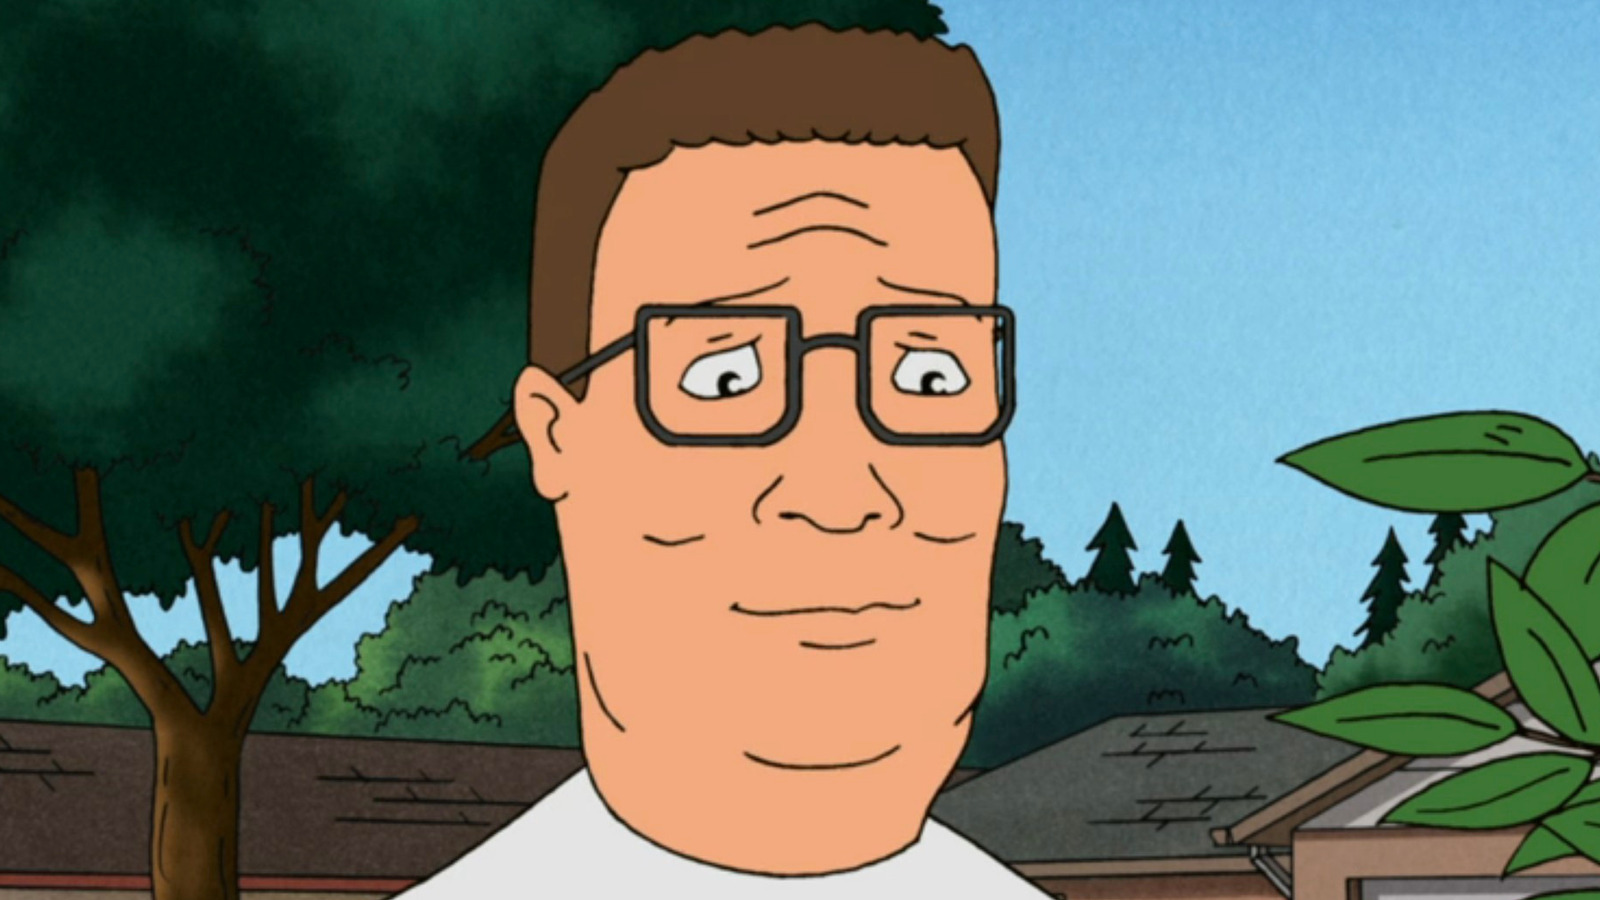 King Of The Hill Revival Creates Both Excitement And Concern Among